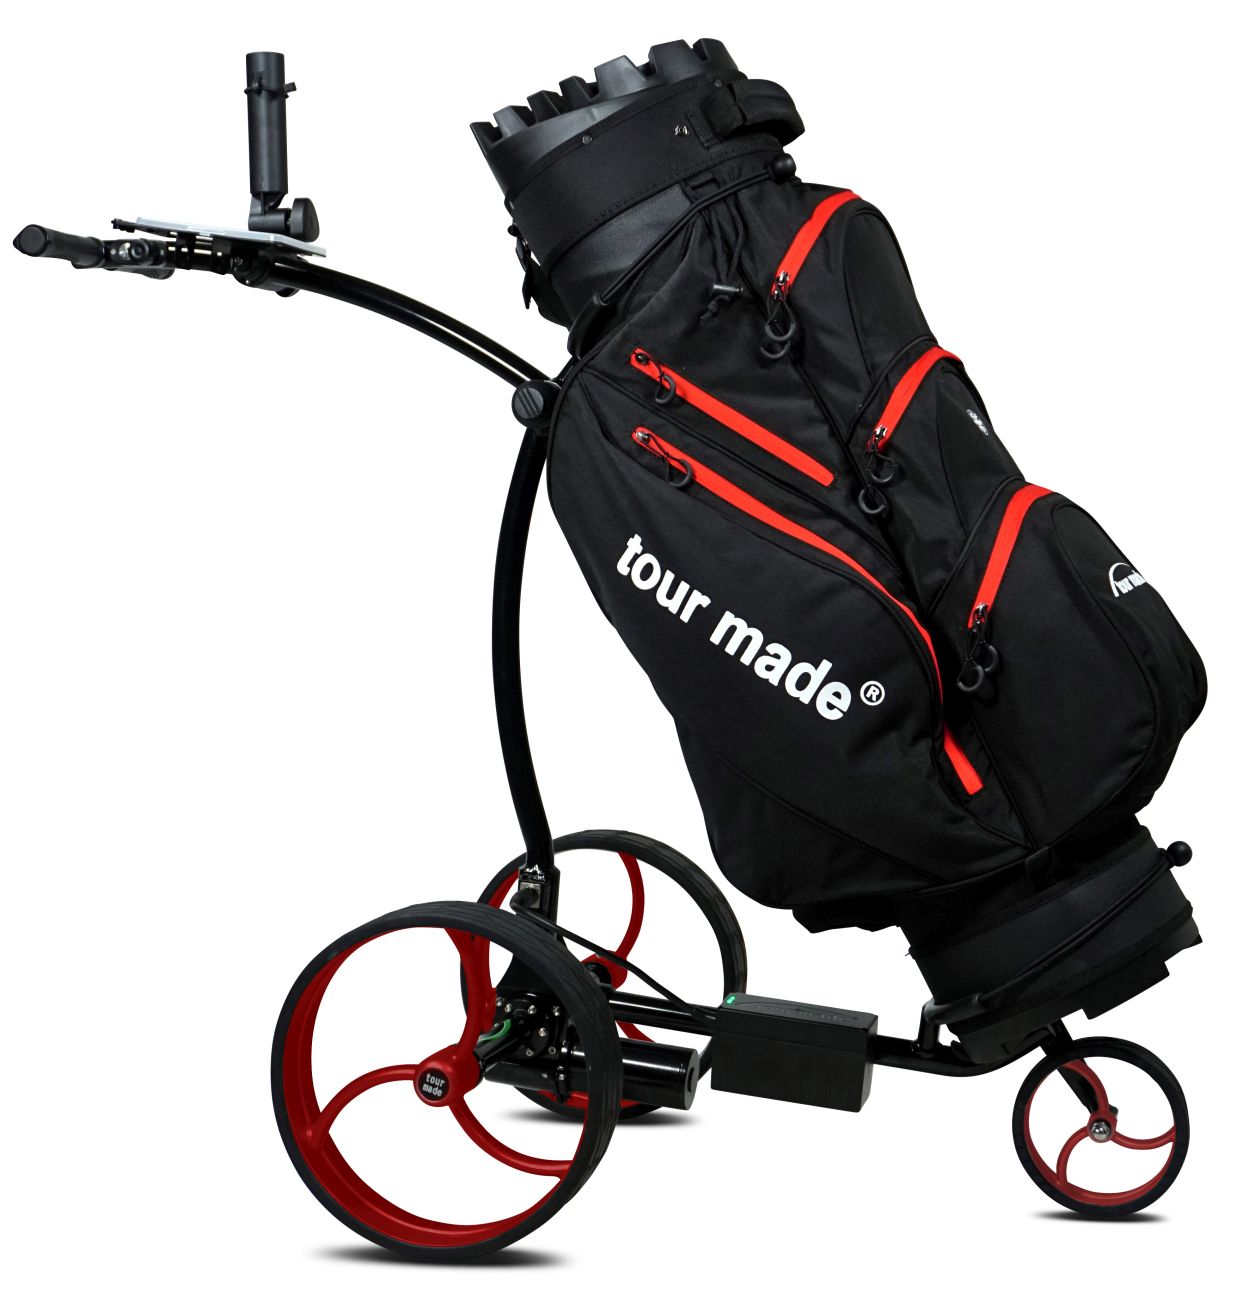 Tour Made RT-610S electric golf trolley